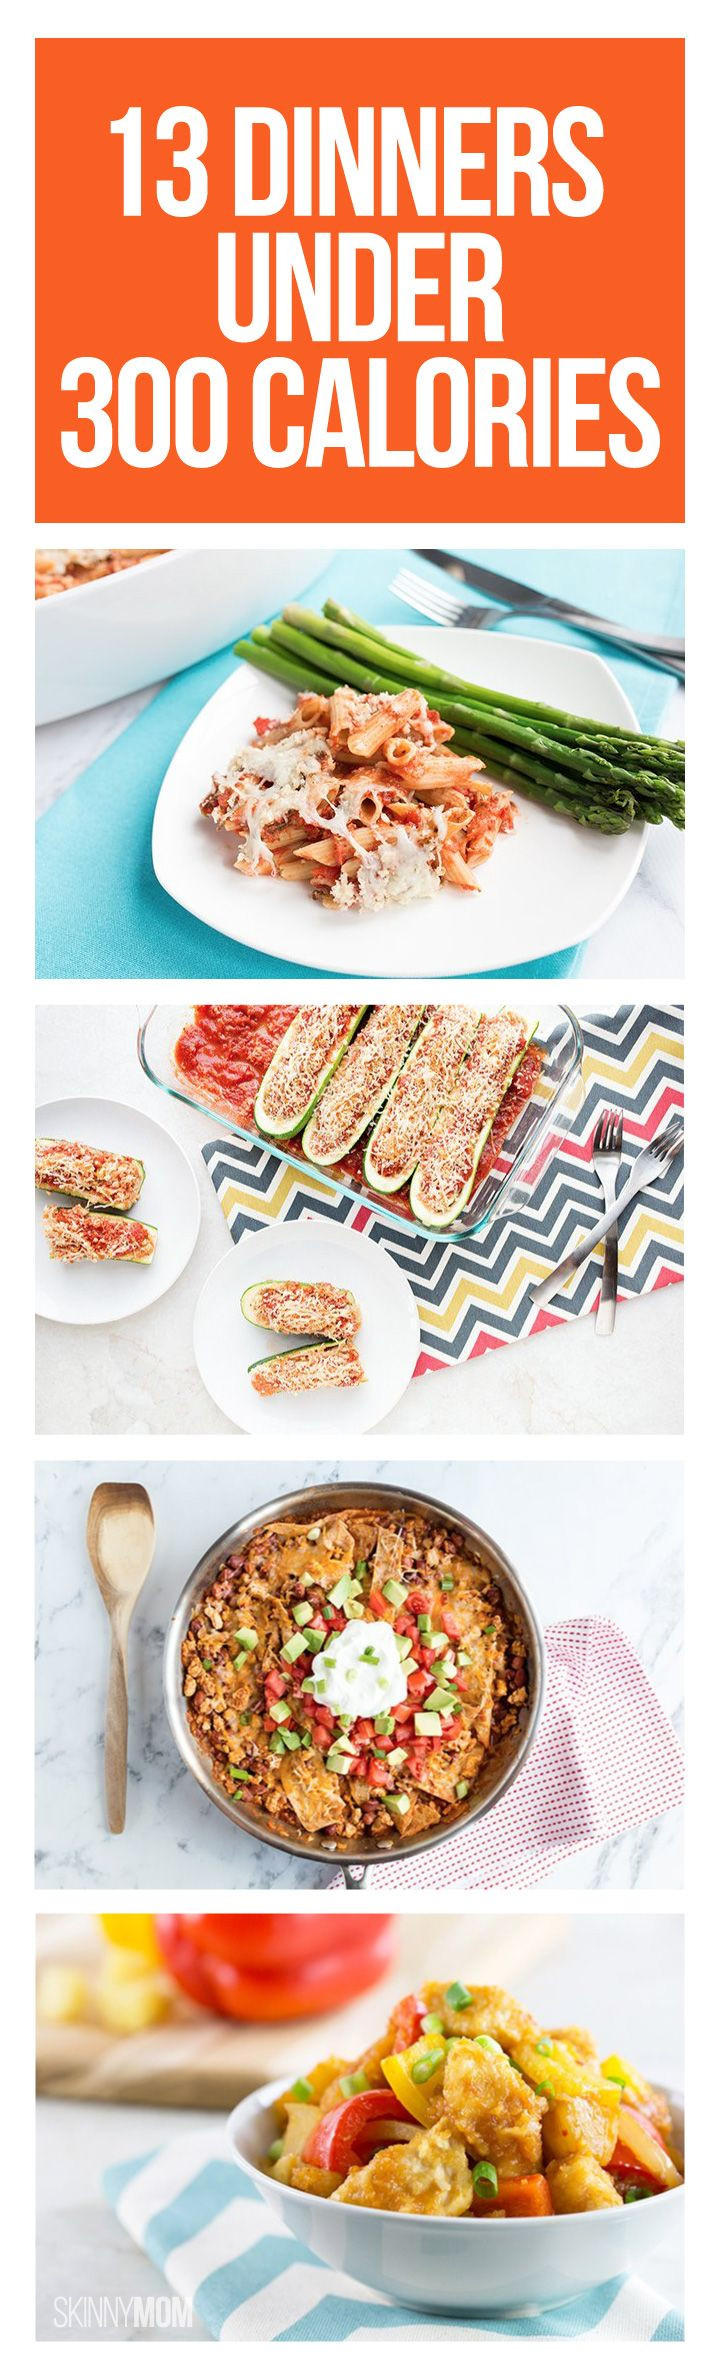 Healthy Lunches Under 300 Calories
 25 best ideas about 300 Calorie Lunches on Pinterest